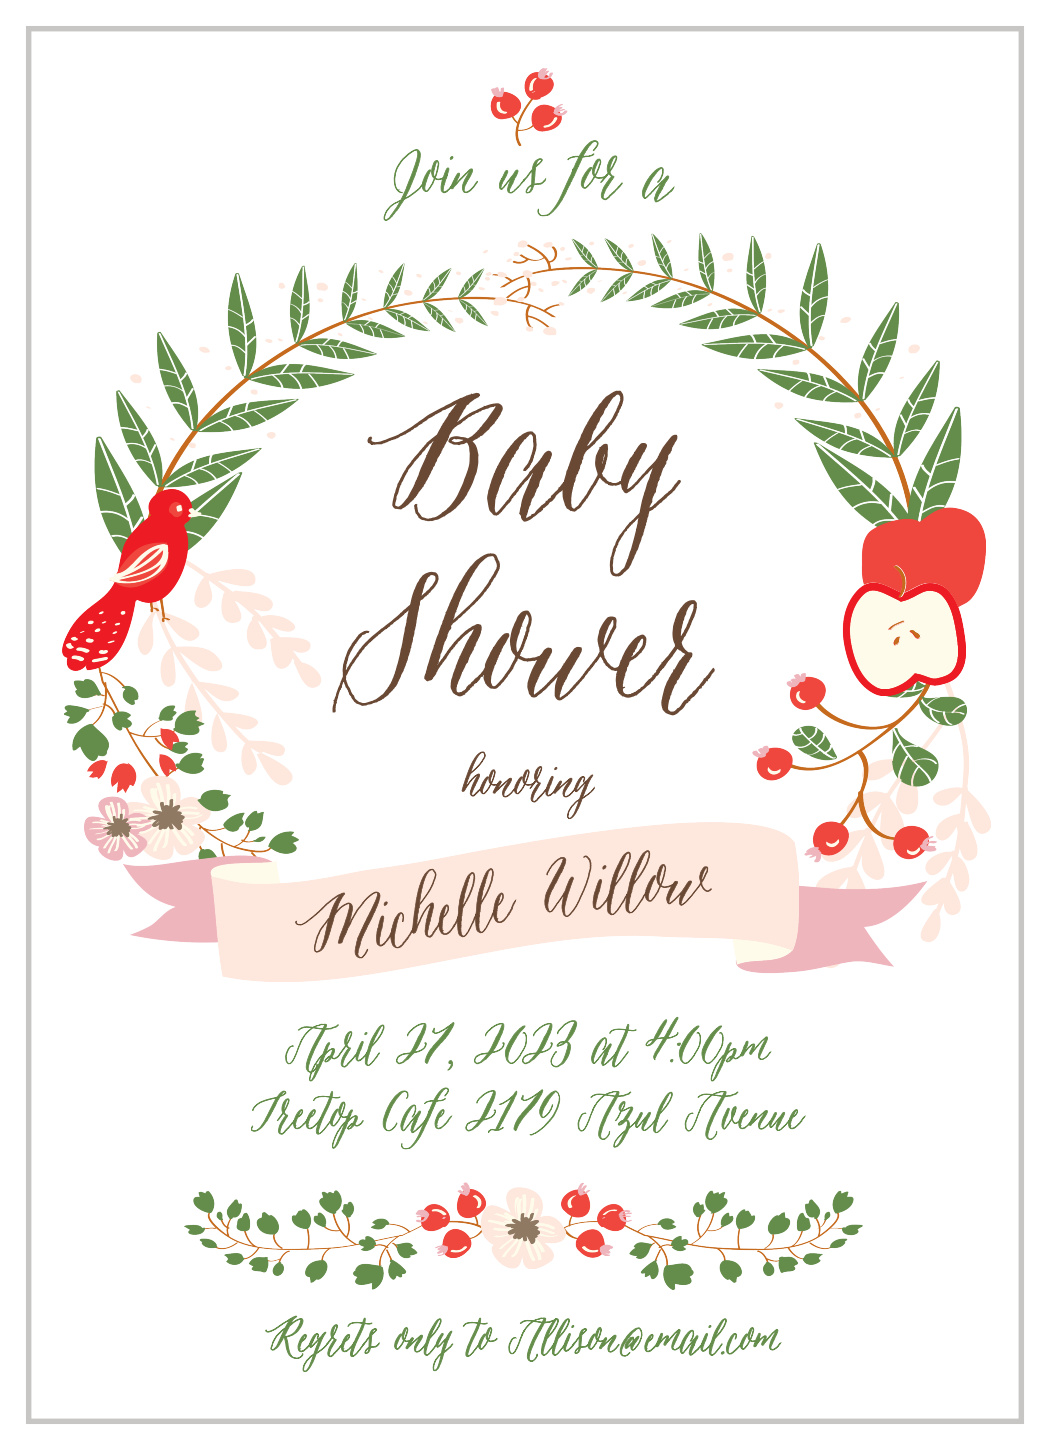 Whimsical Forest Baby Shower Invitations